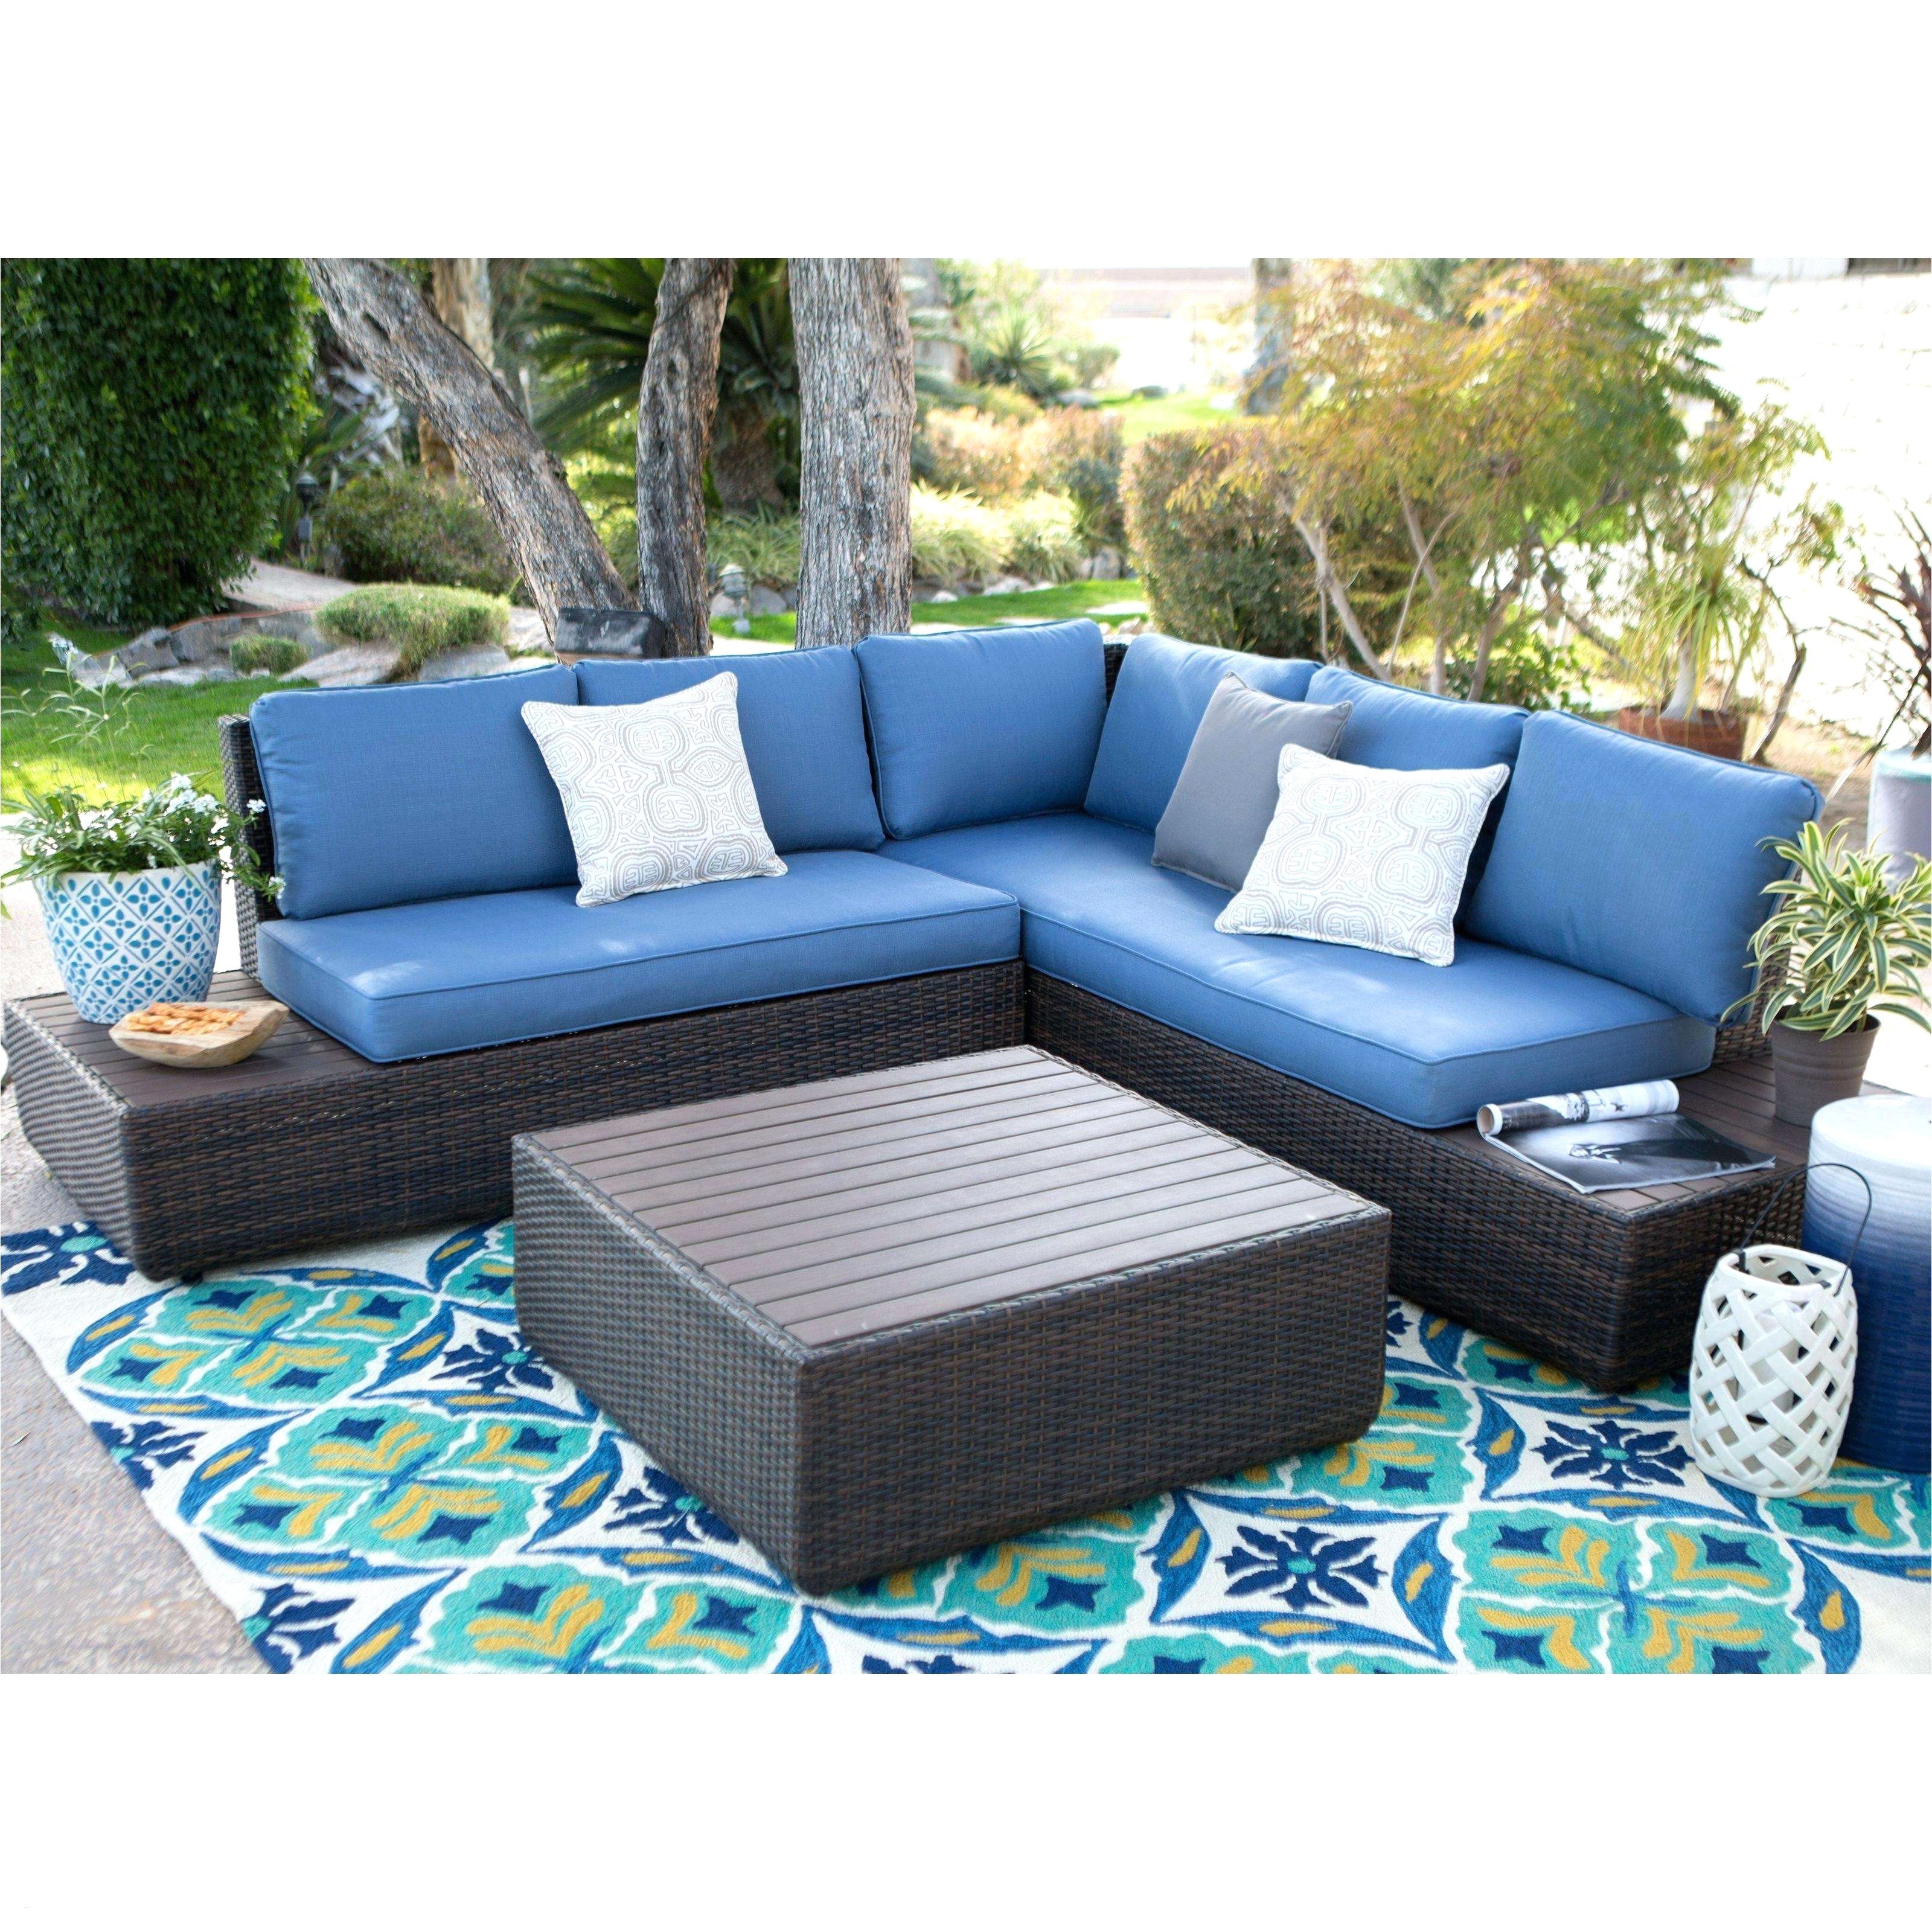 outdoor furniture covers home interior exciting outdoor furniture covers tar magnificent patio set is